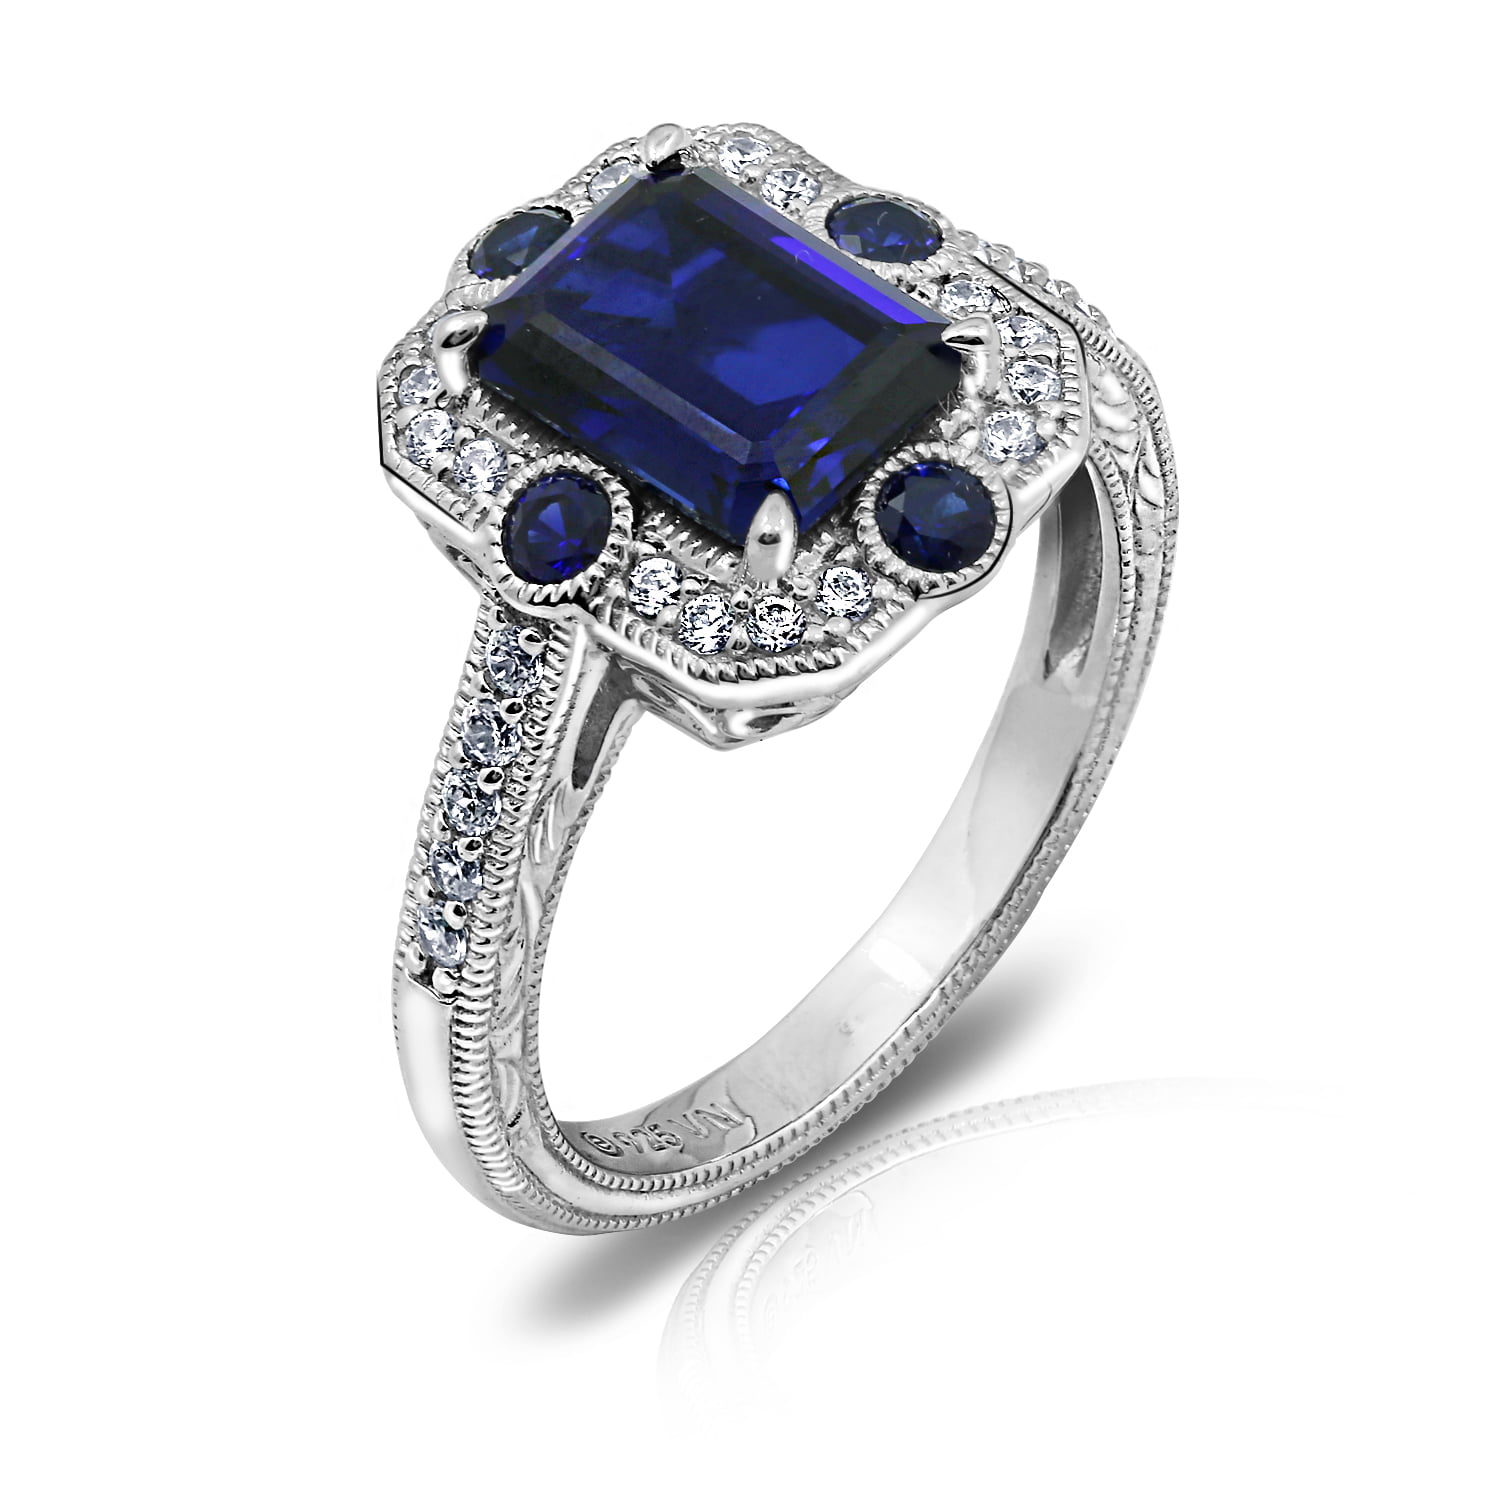 Details about   Sterling Silver Blue Stone Unique Ring Size 6 